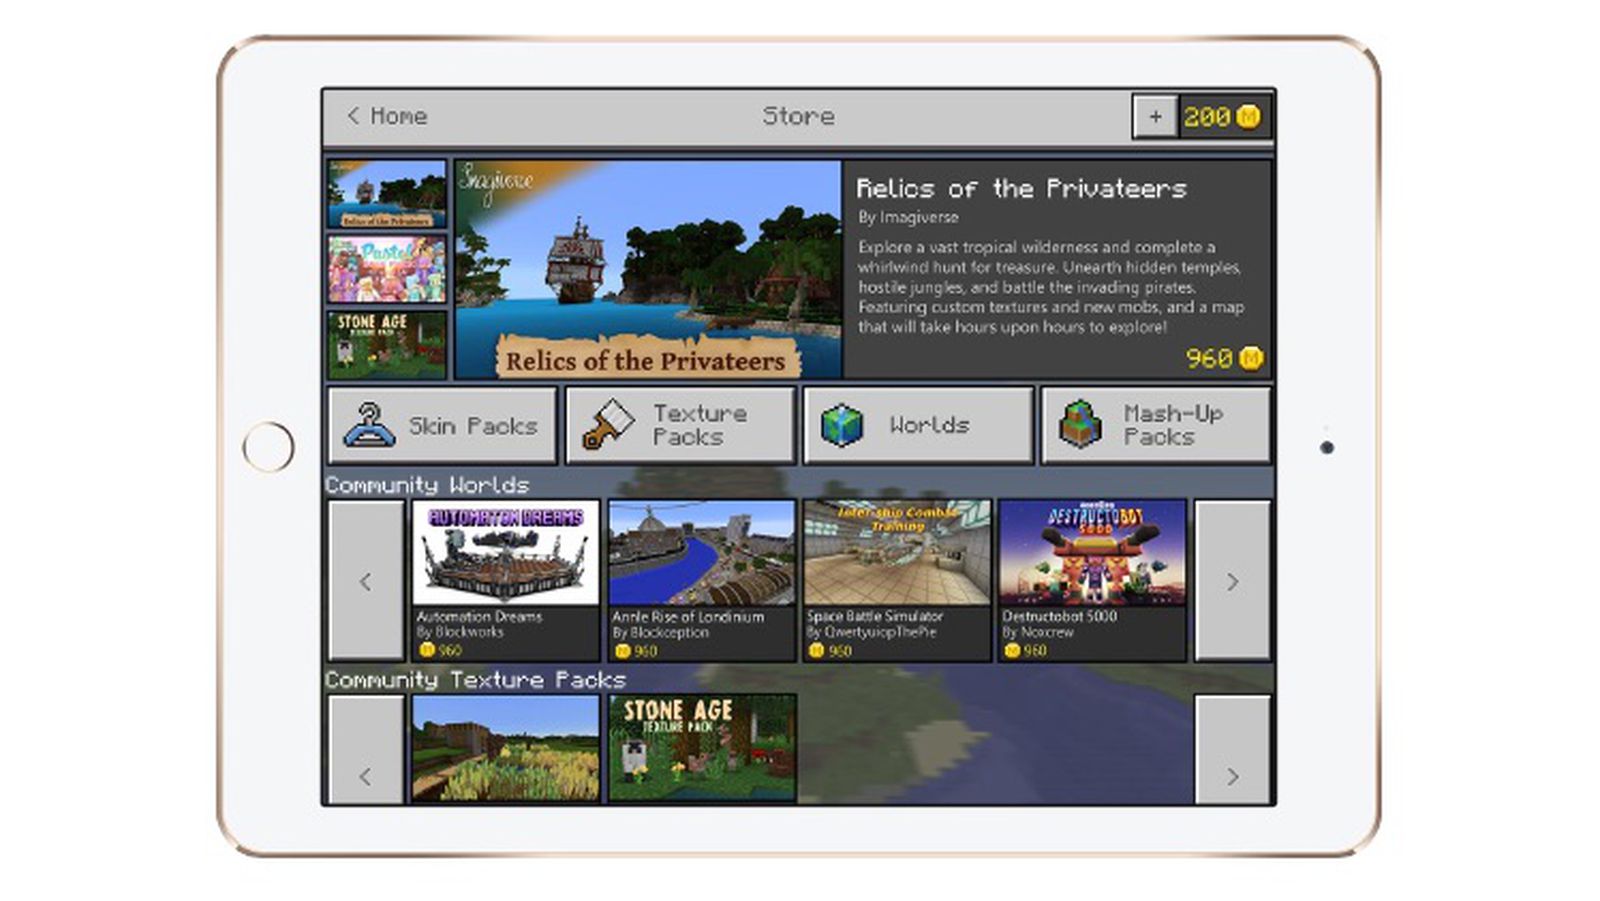 Minecraft - Pocket Edition' Unveiled for iOS, Already Number One